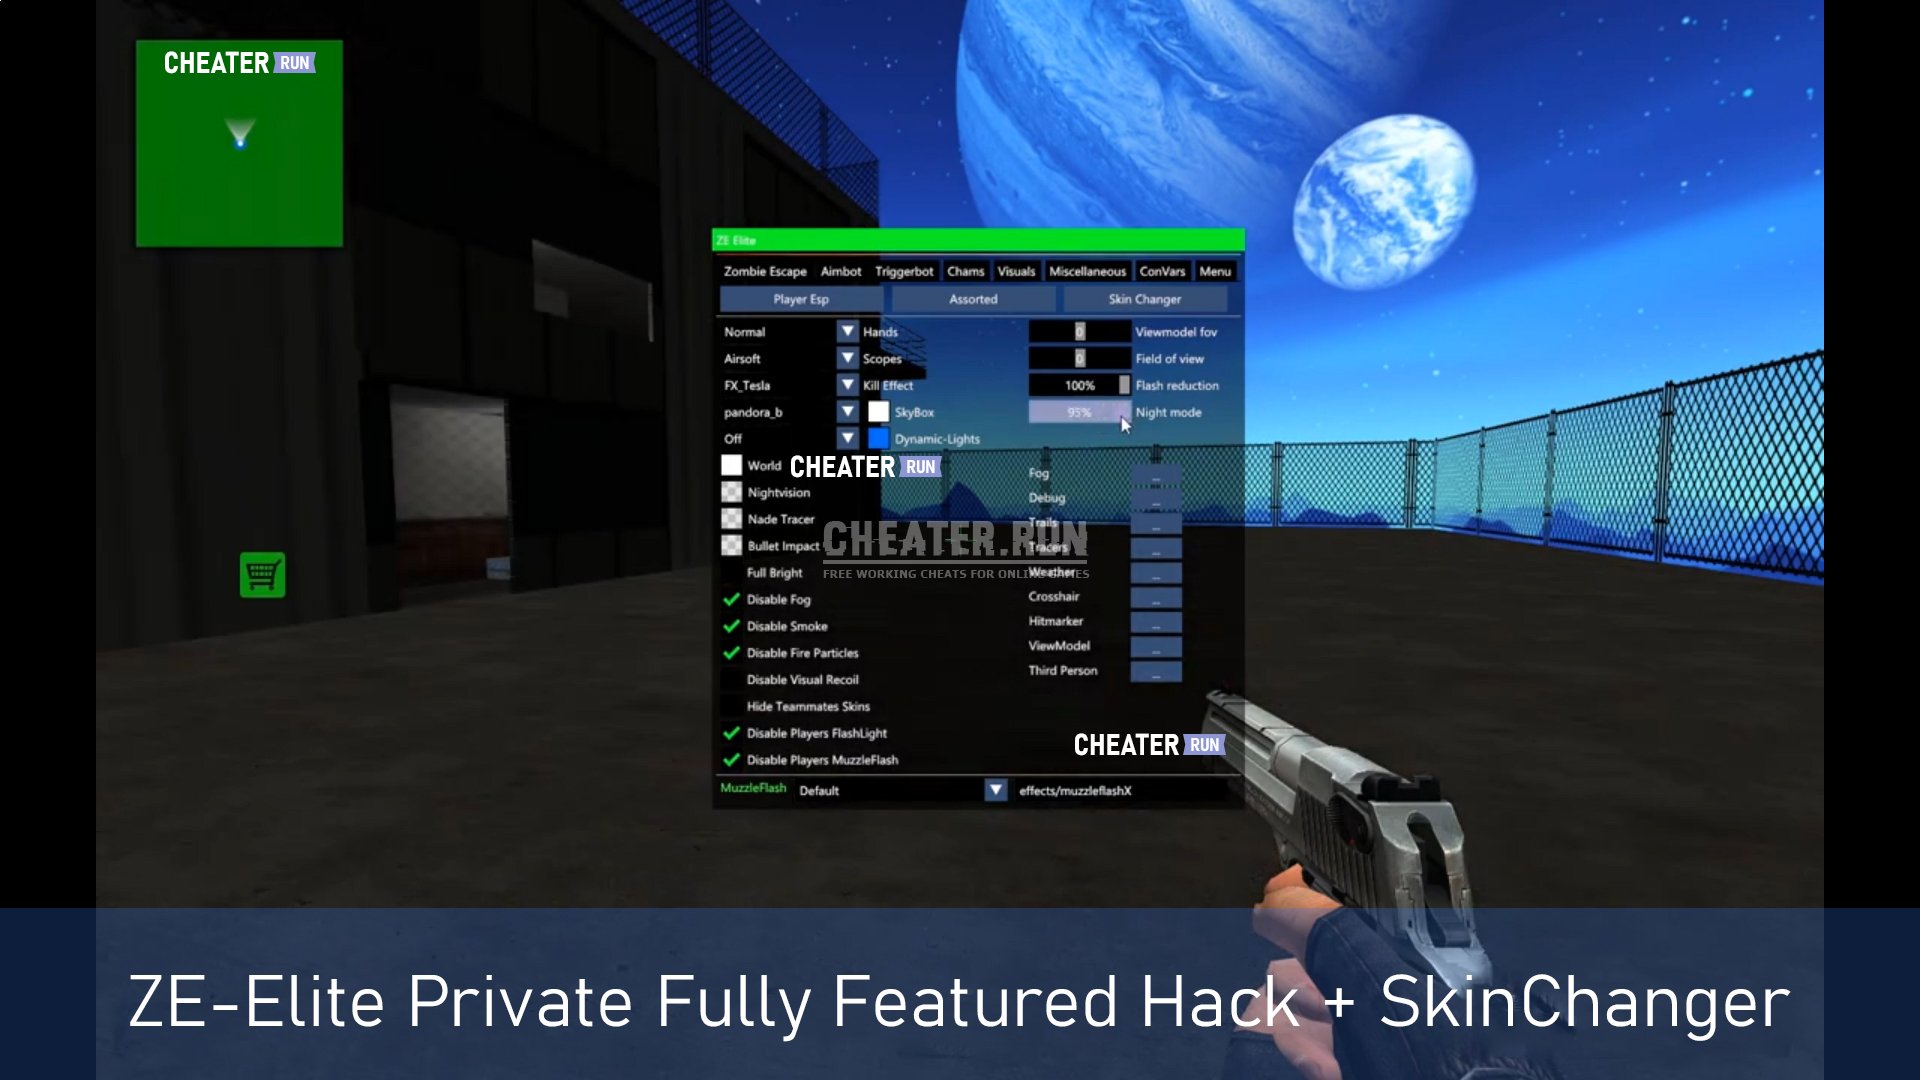 ZE-Elite Private Fully Featured Hack + SkinChanger